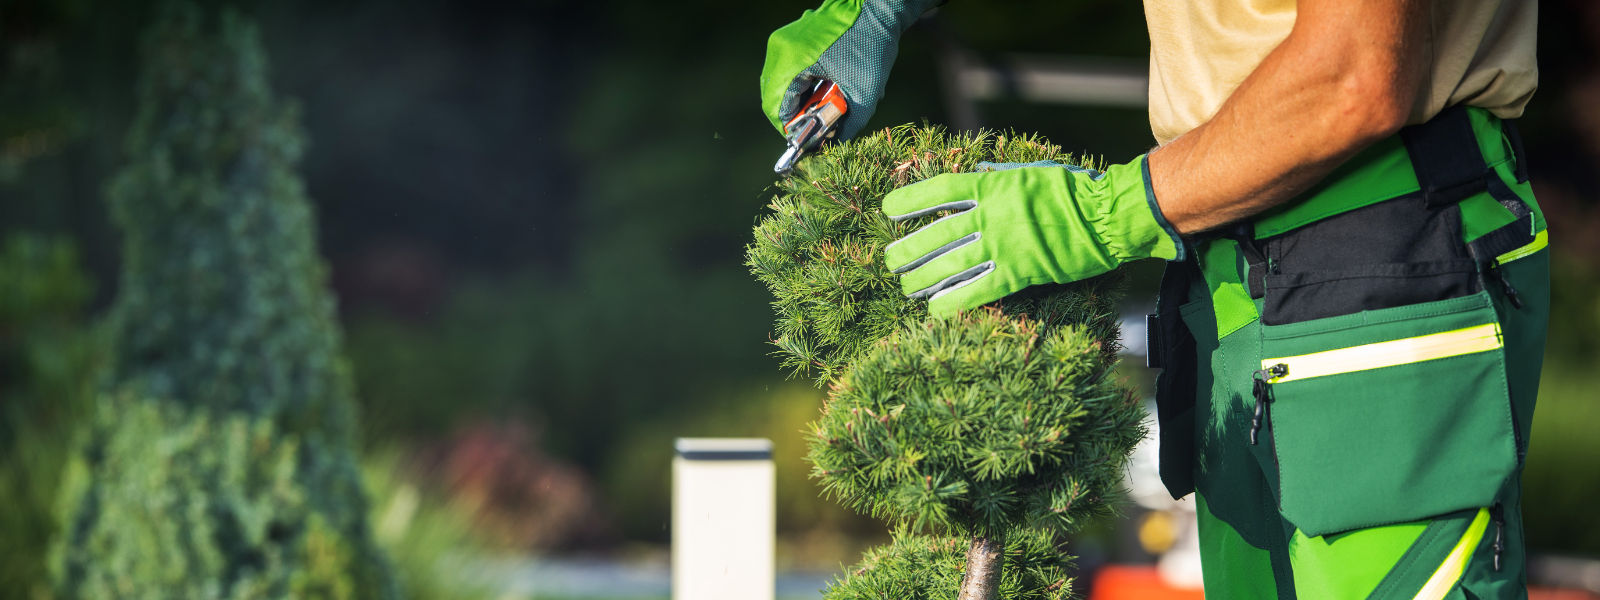 ARBORGREEN OÜ - We offer comprehensive arboricultural services including the cutting of dangerous trees, milling, harvest...